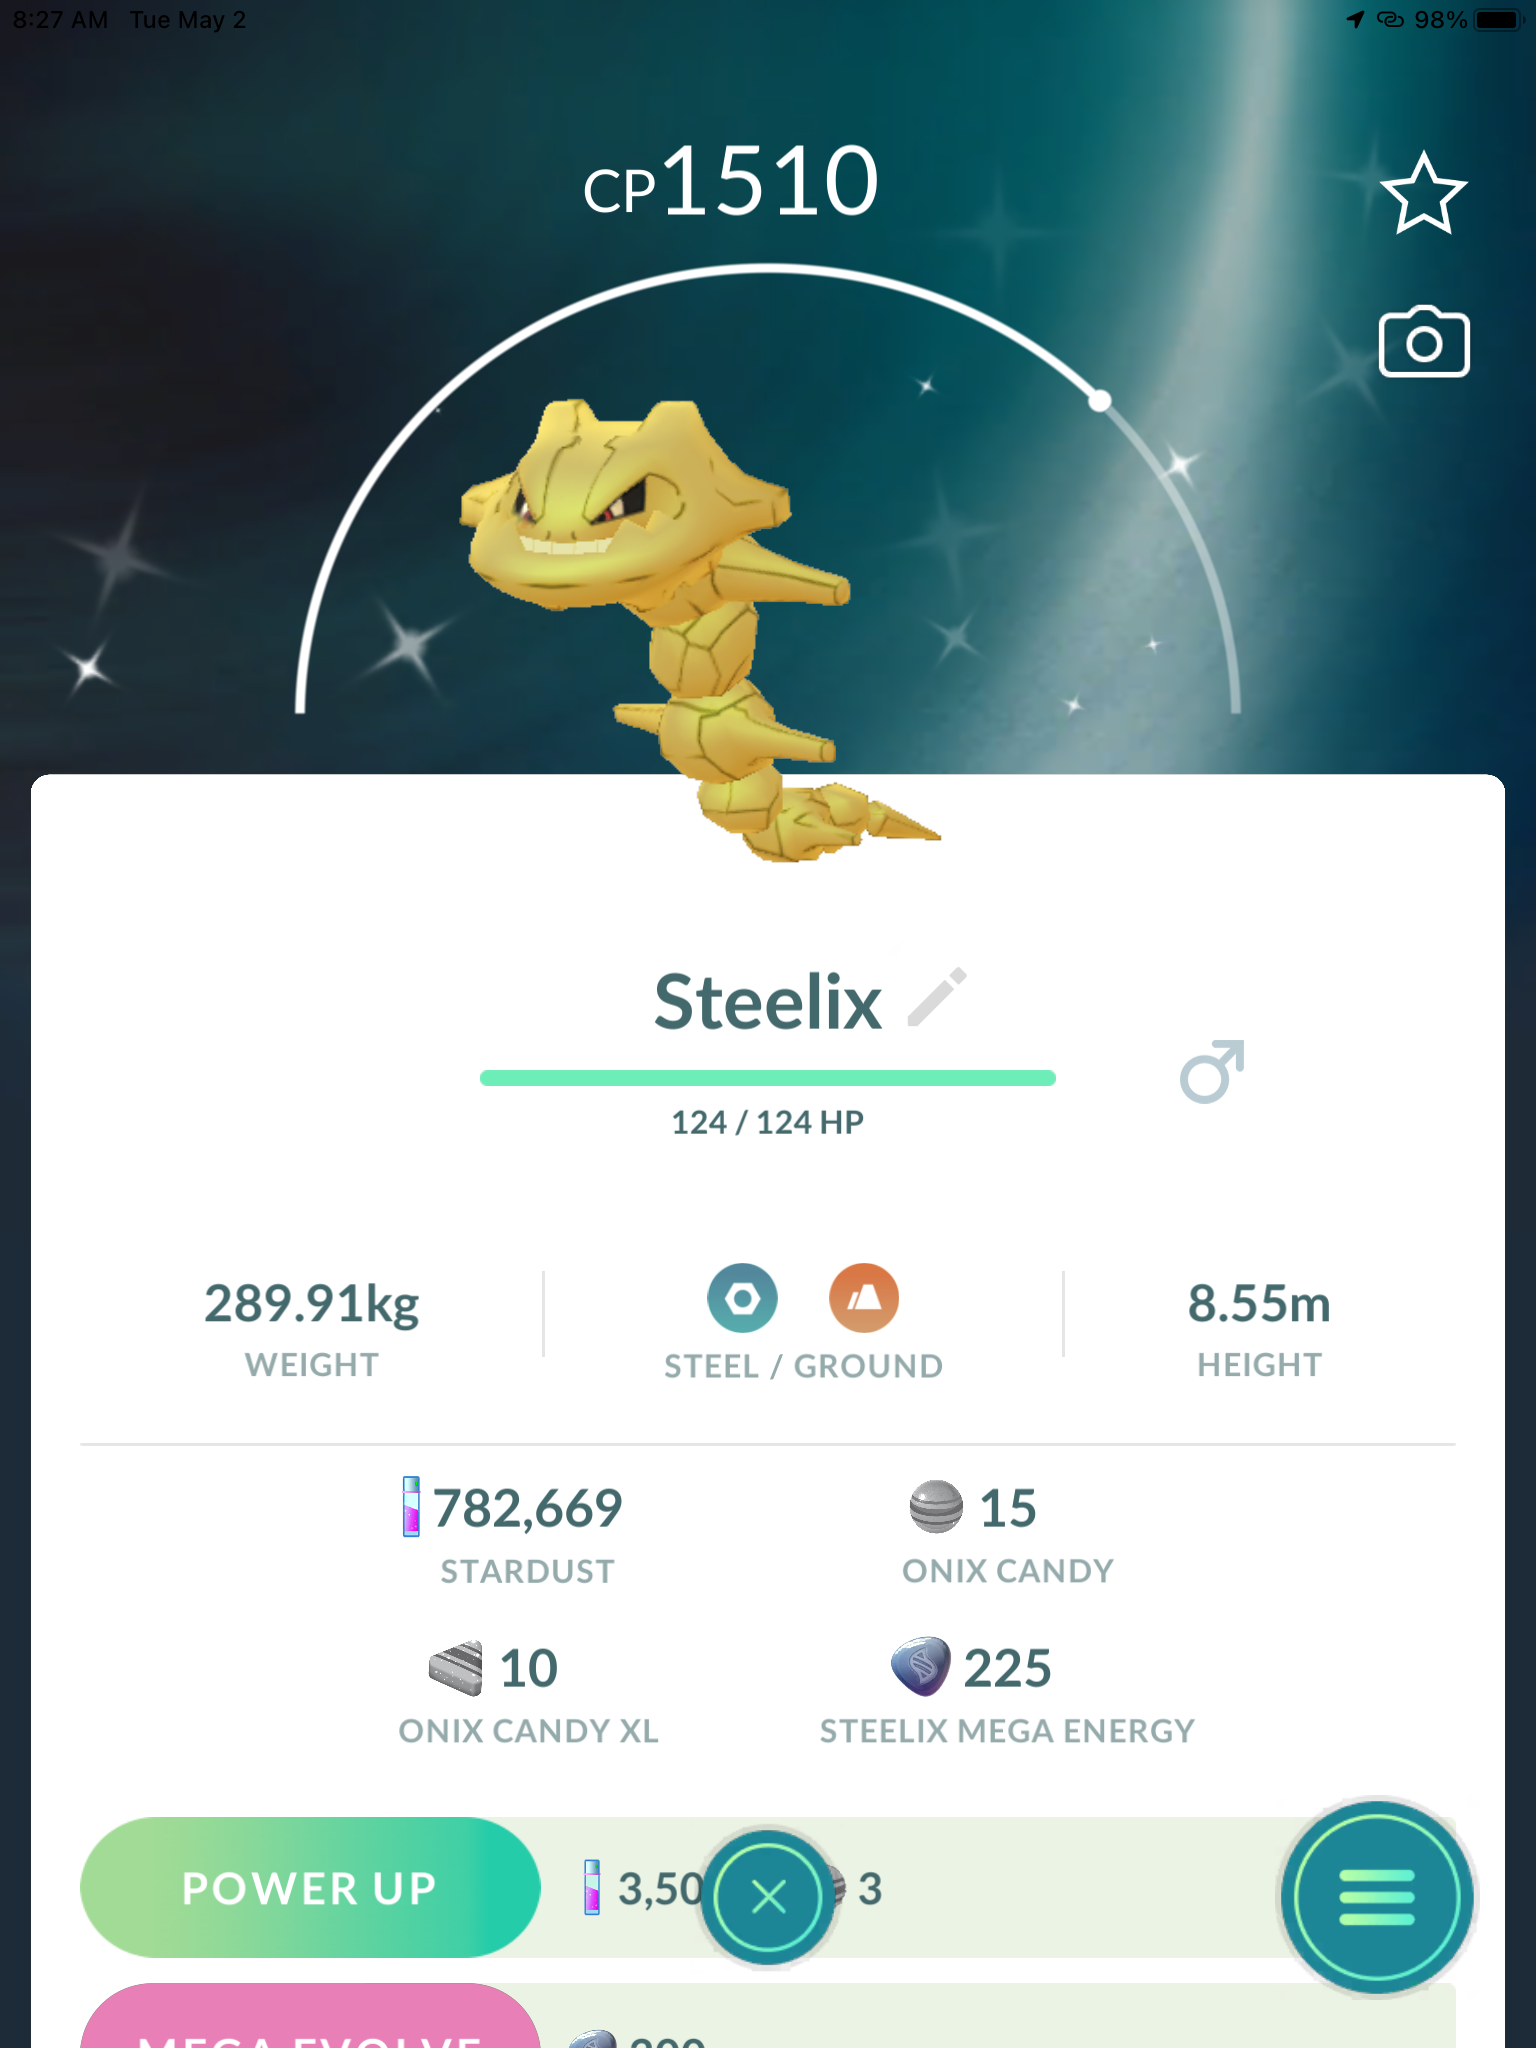 WORLDS FIRST 96%*SHINY LUCKY* ONIX EVOLUTION TO SHINY LUCKY STEELIX IN  POKEMON GO ADVENTURE WEEK 